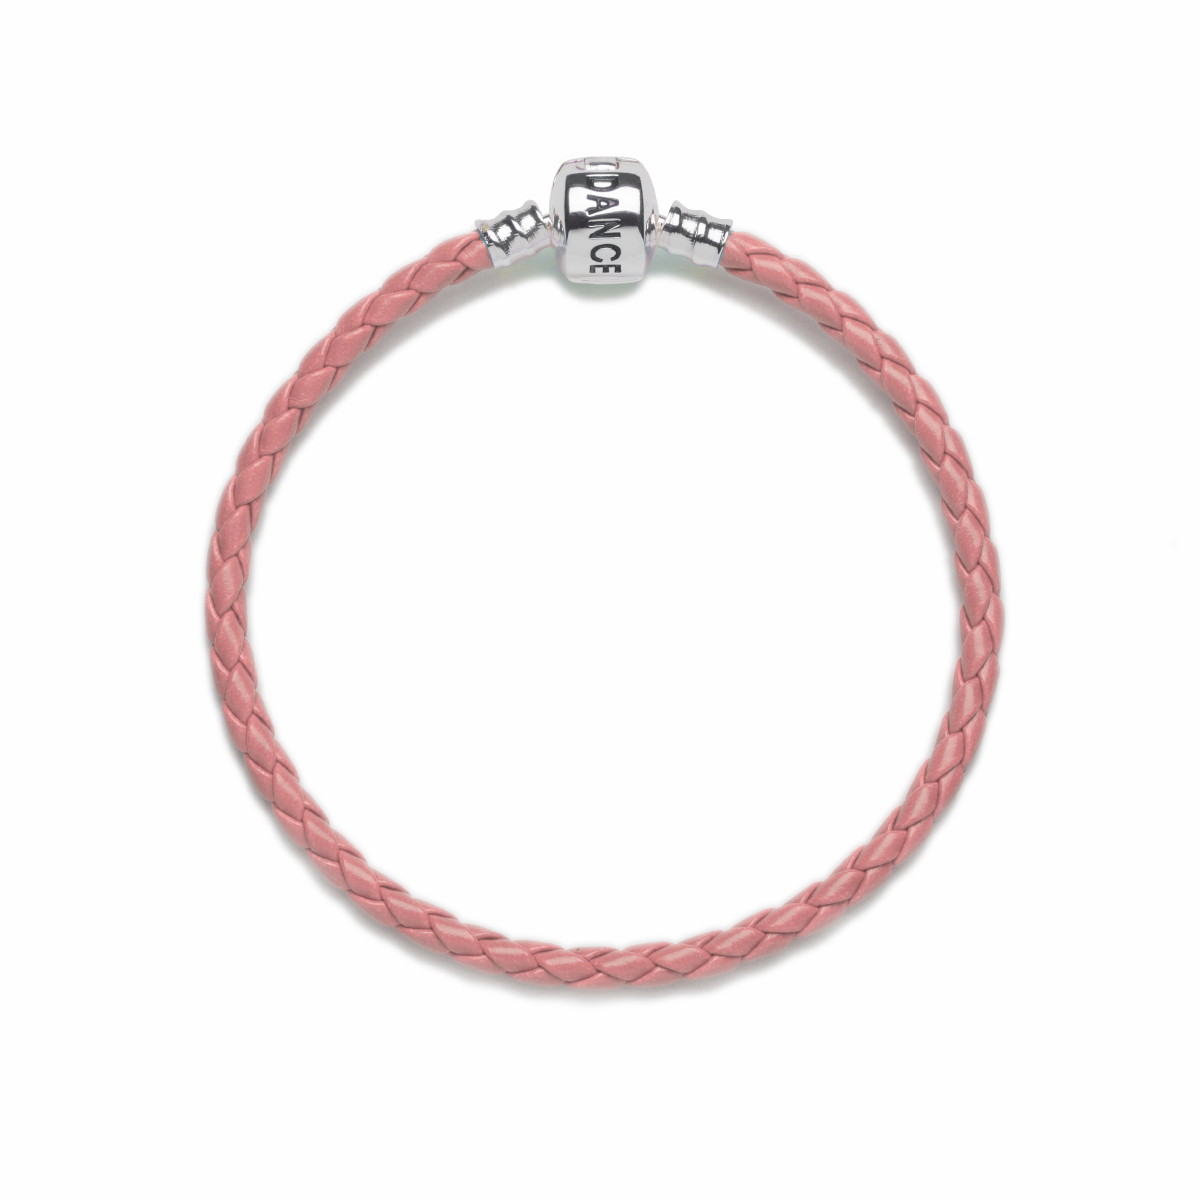 Official Riverdance20 Coral Leather Style Charm Bracelet